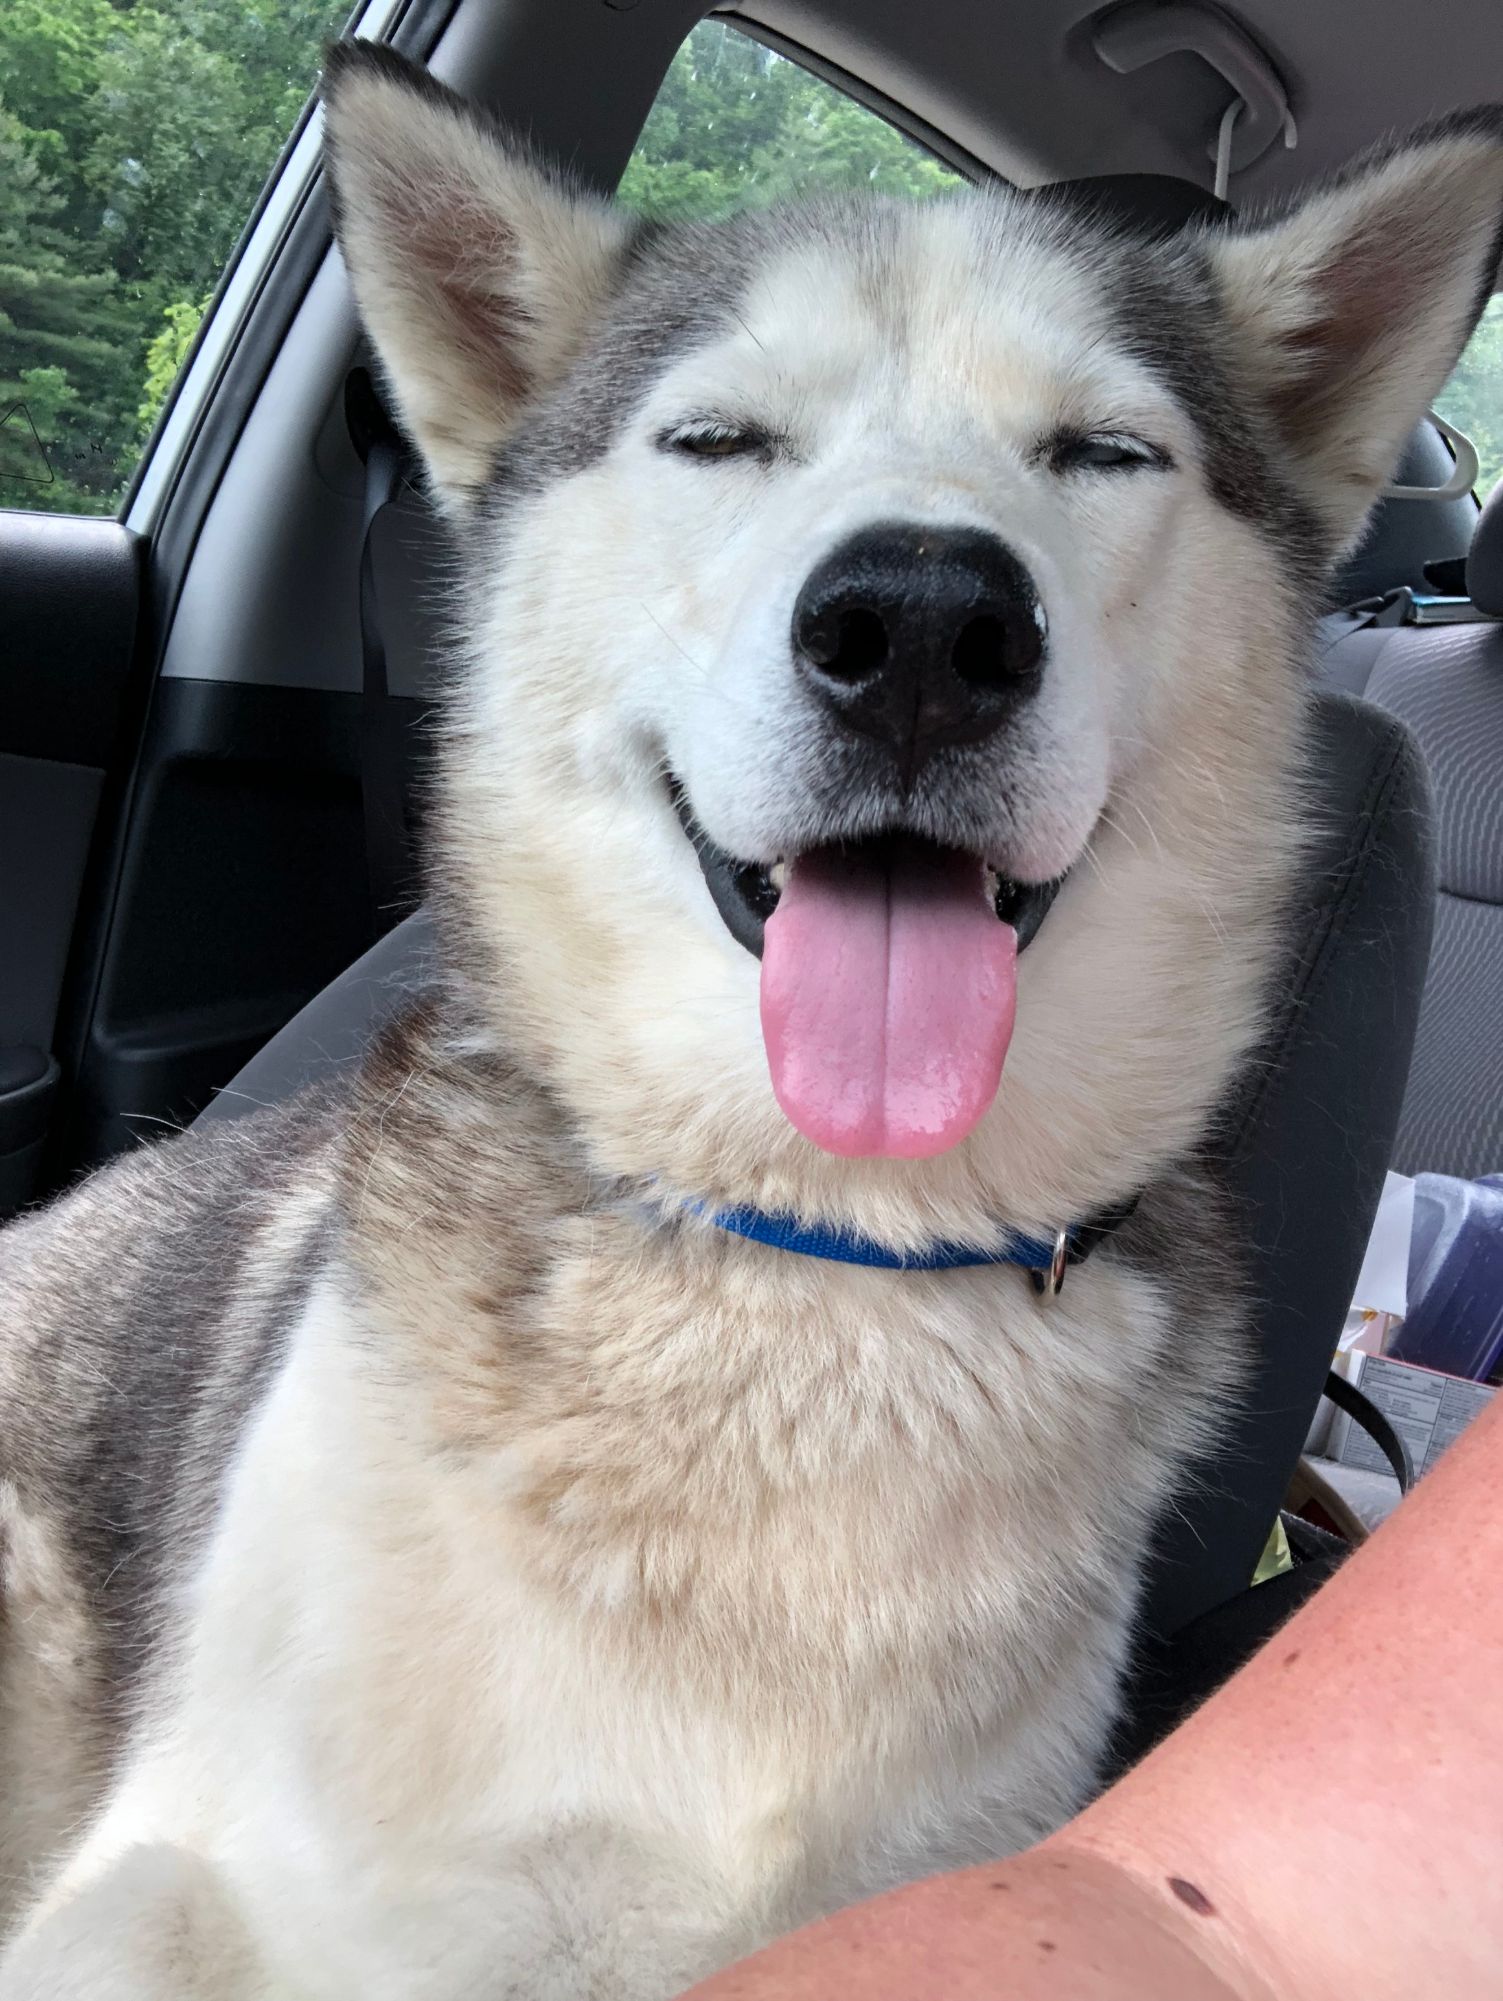 Apollo sitting in the car with his tongue out